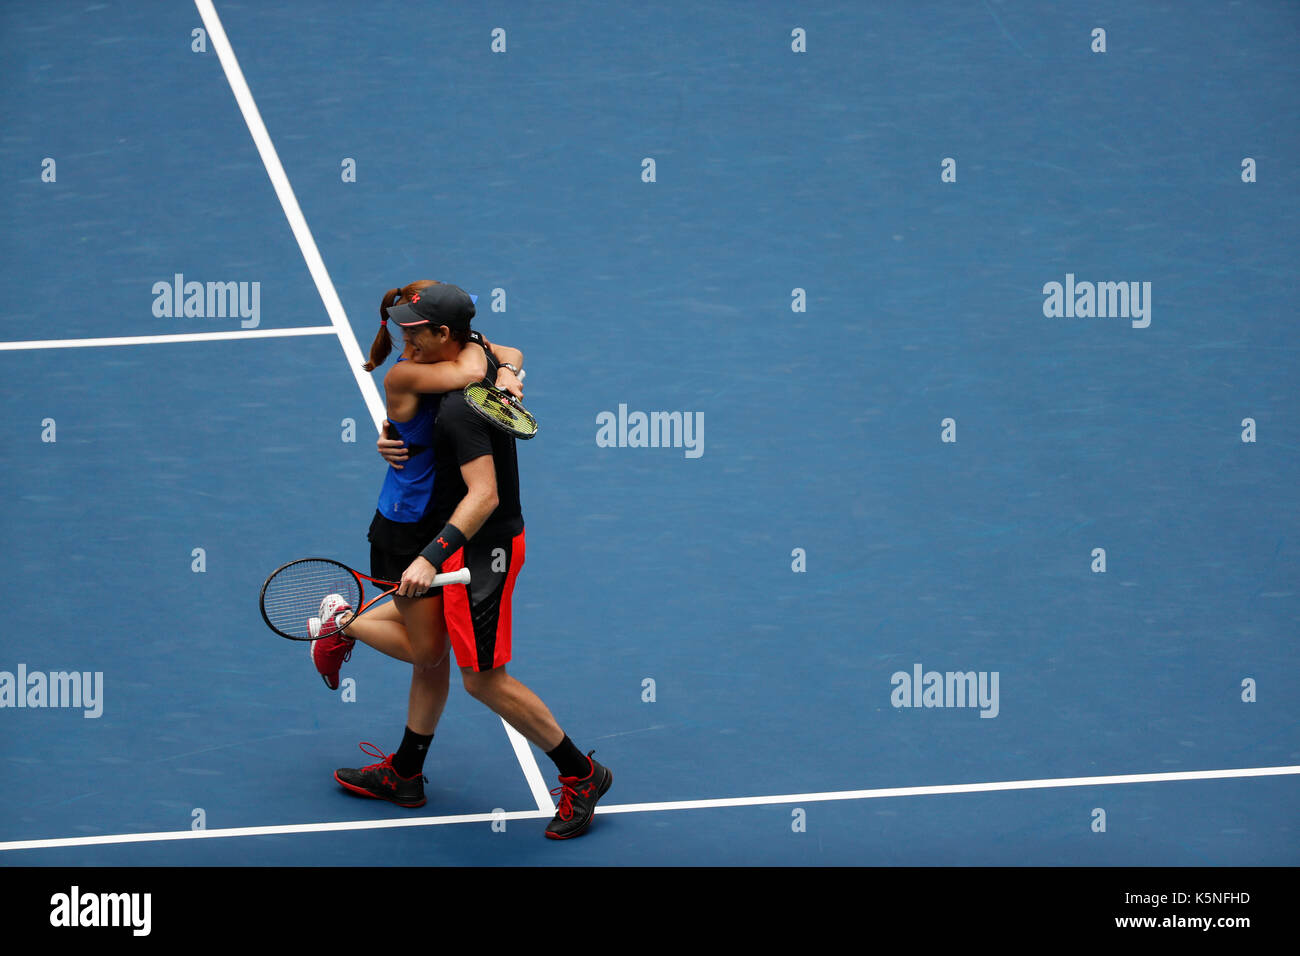 New York, USA. 9th Sep, 2017. Martina Hingis (L) of Switzerland and Jamie Murray of Great Britain celebrate after defeating Hao-Ching Chan of Chinese Taipei and Michael Venus of New Zealand during the mixed doubles final match at the 2017 US Open in New York, the United States, Sept. 9, 2017. Martina Hingis and Jamie Murray won 2-1 to claim the title. Credit: Qin Lang/Xinhua/Alamy Live News Stock Photo